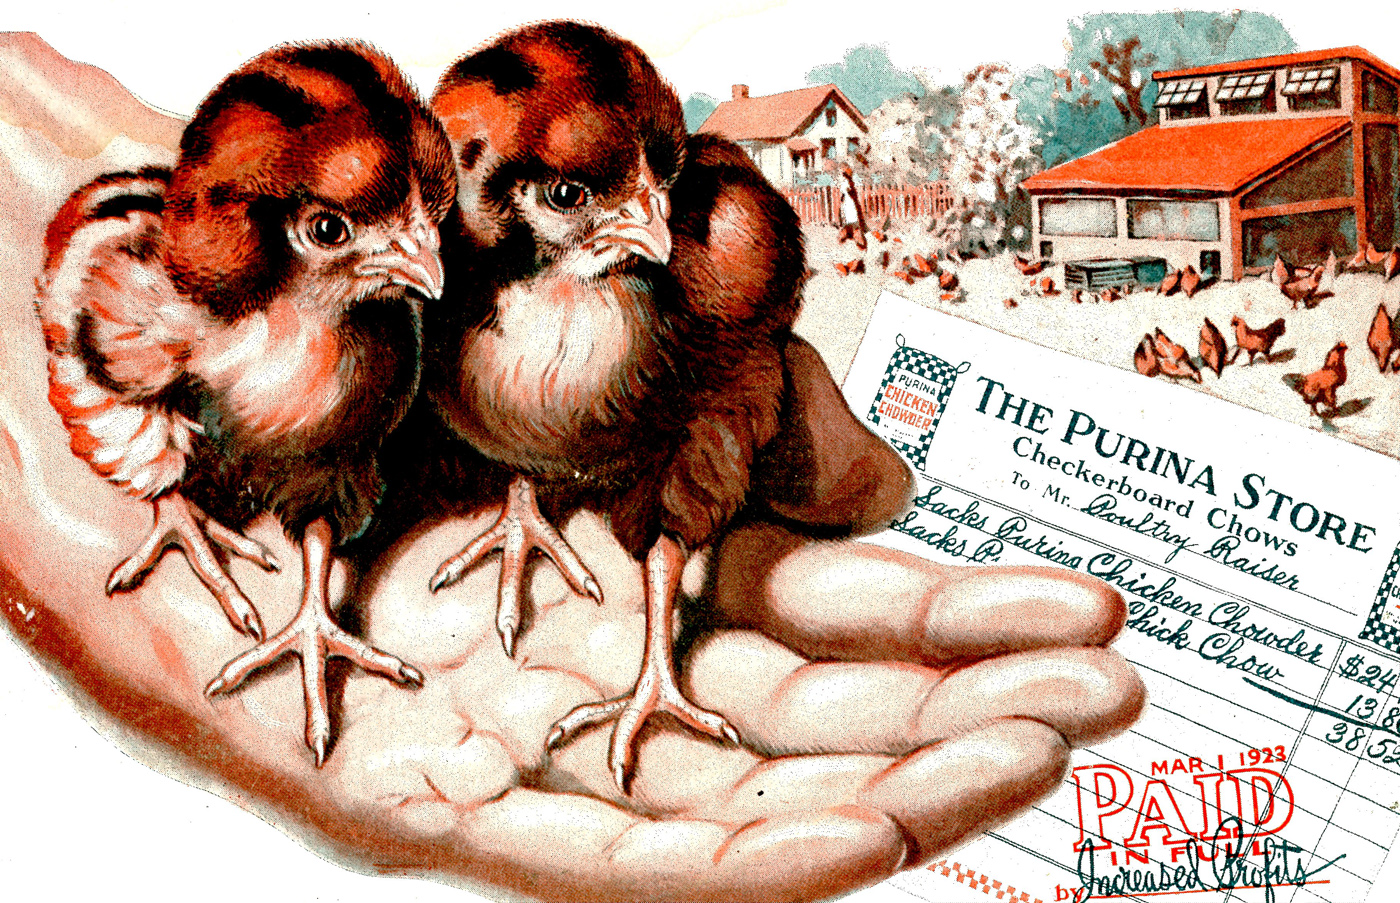 two small birds sitting on top of the palm of a hand